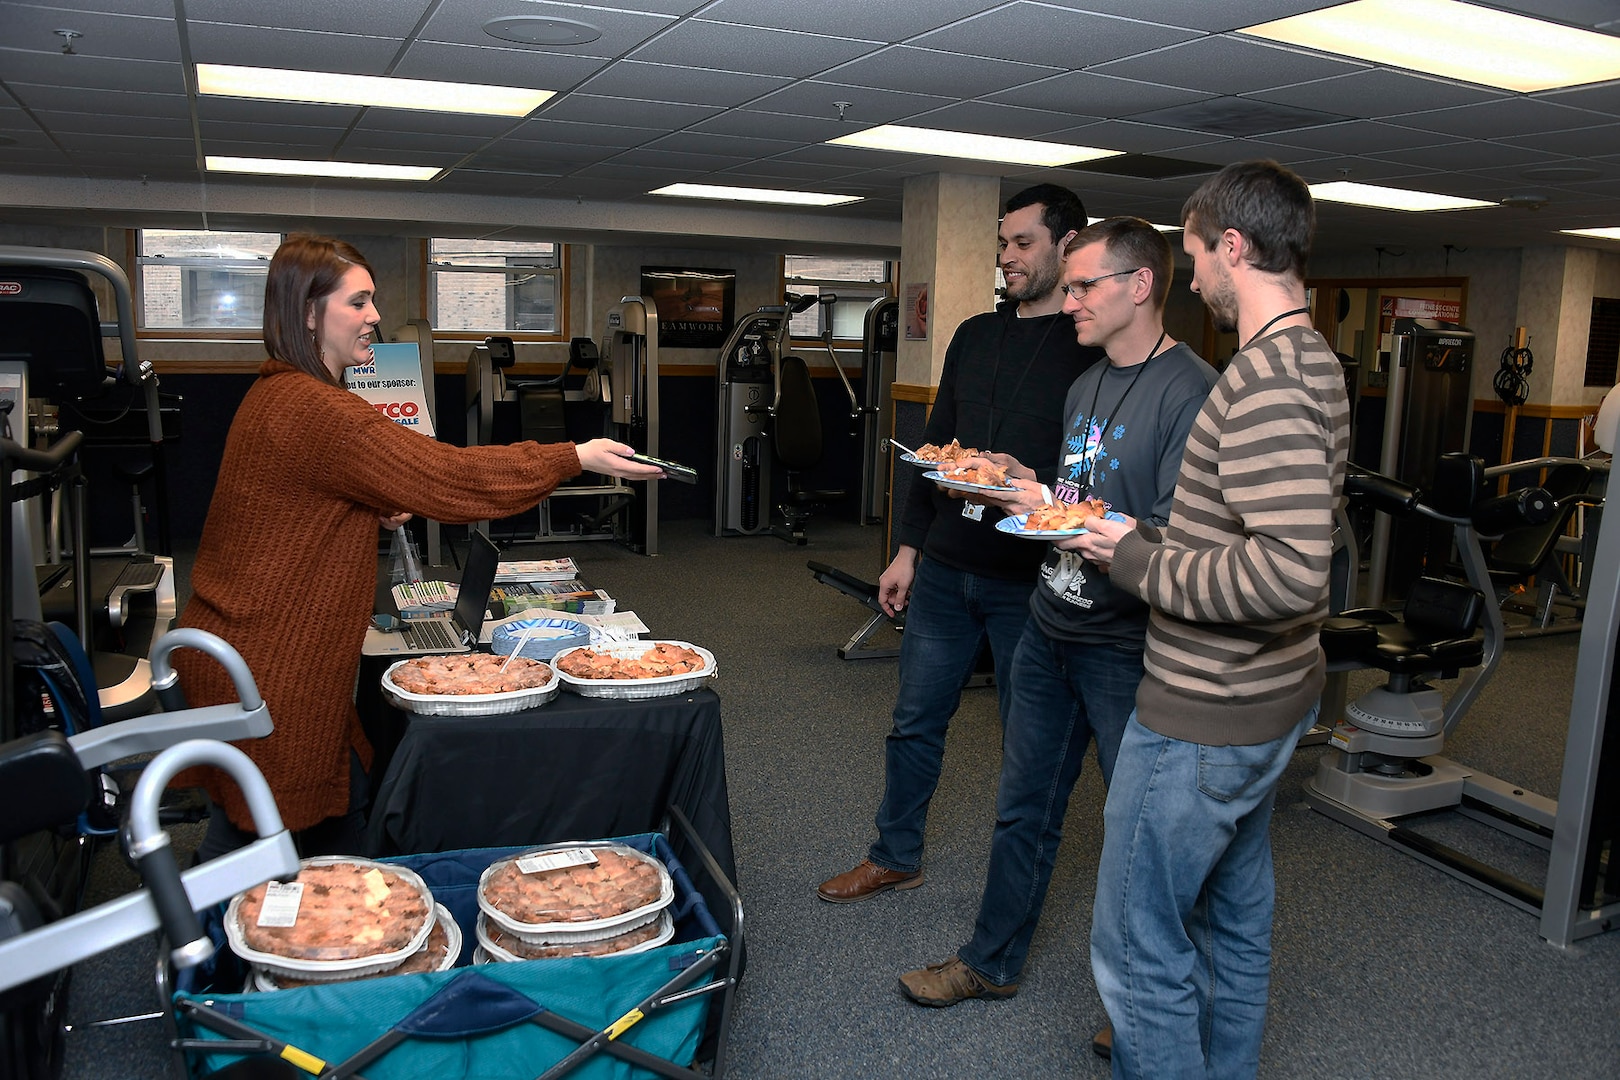 Cory William (left), Chad McKeever (middle) and Chris Ashbay (right) accept their post run apple pie from a sponsor rep after participating in the Pi Day observance March 11.